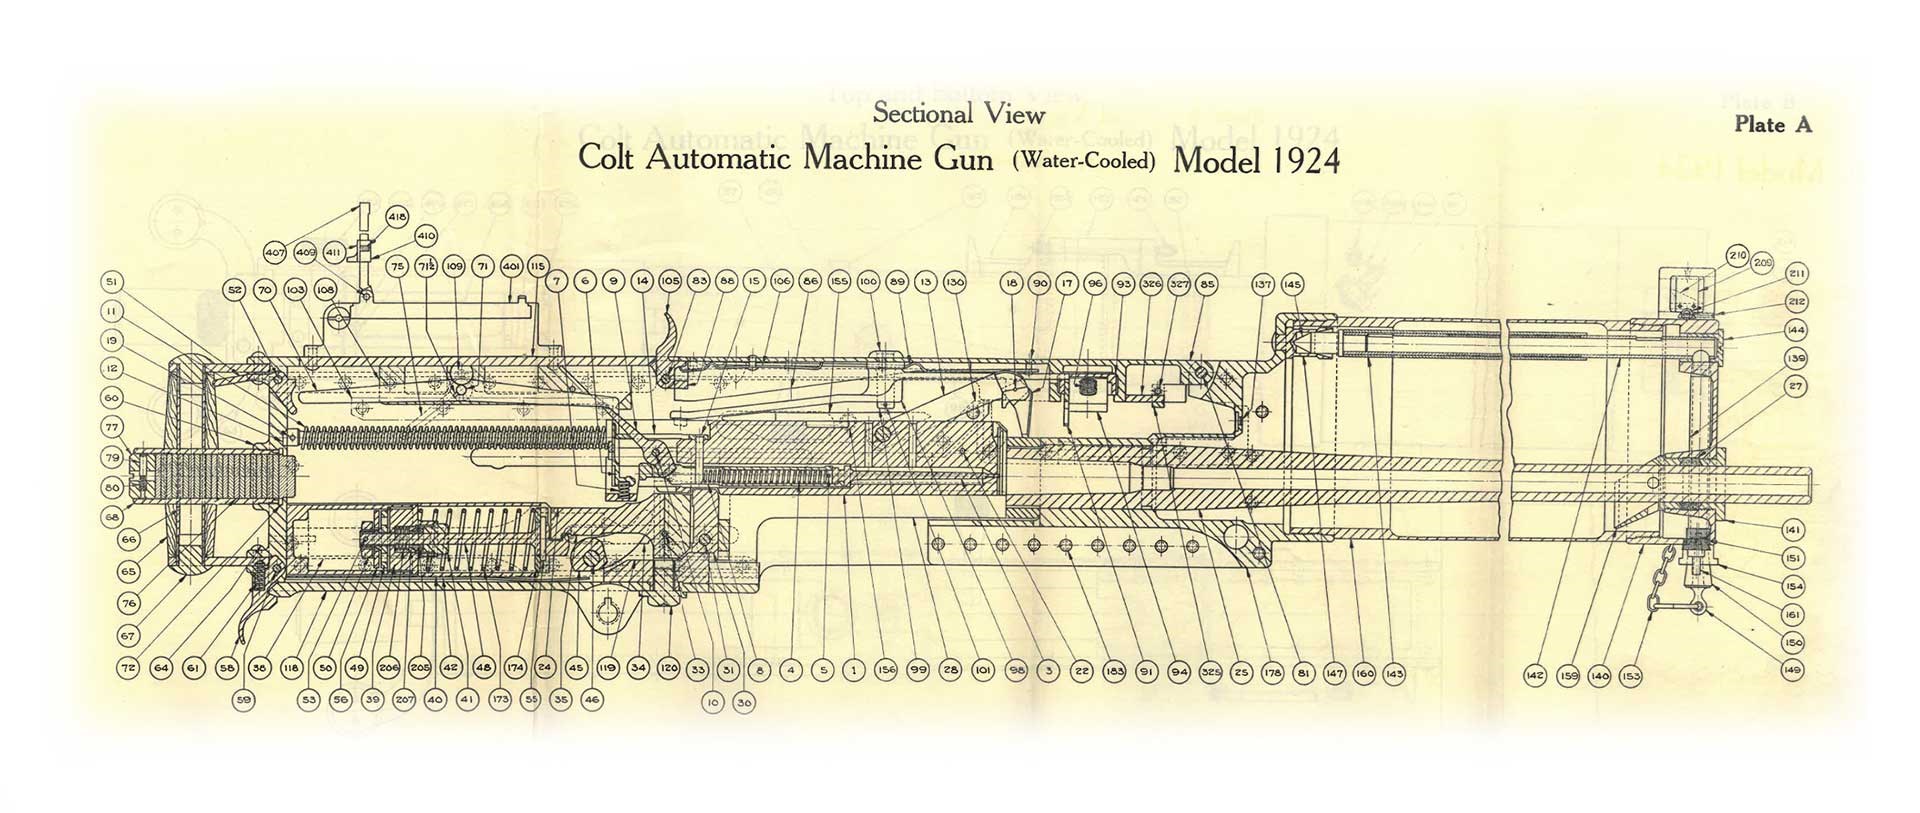 Schematic view of the inside layout of the Colt Model 1924 Automatic Machine Gun